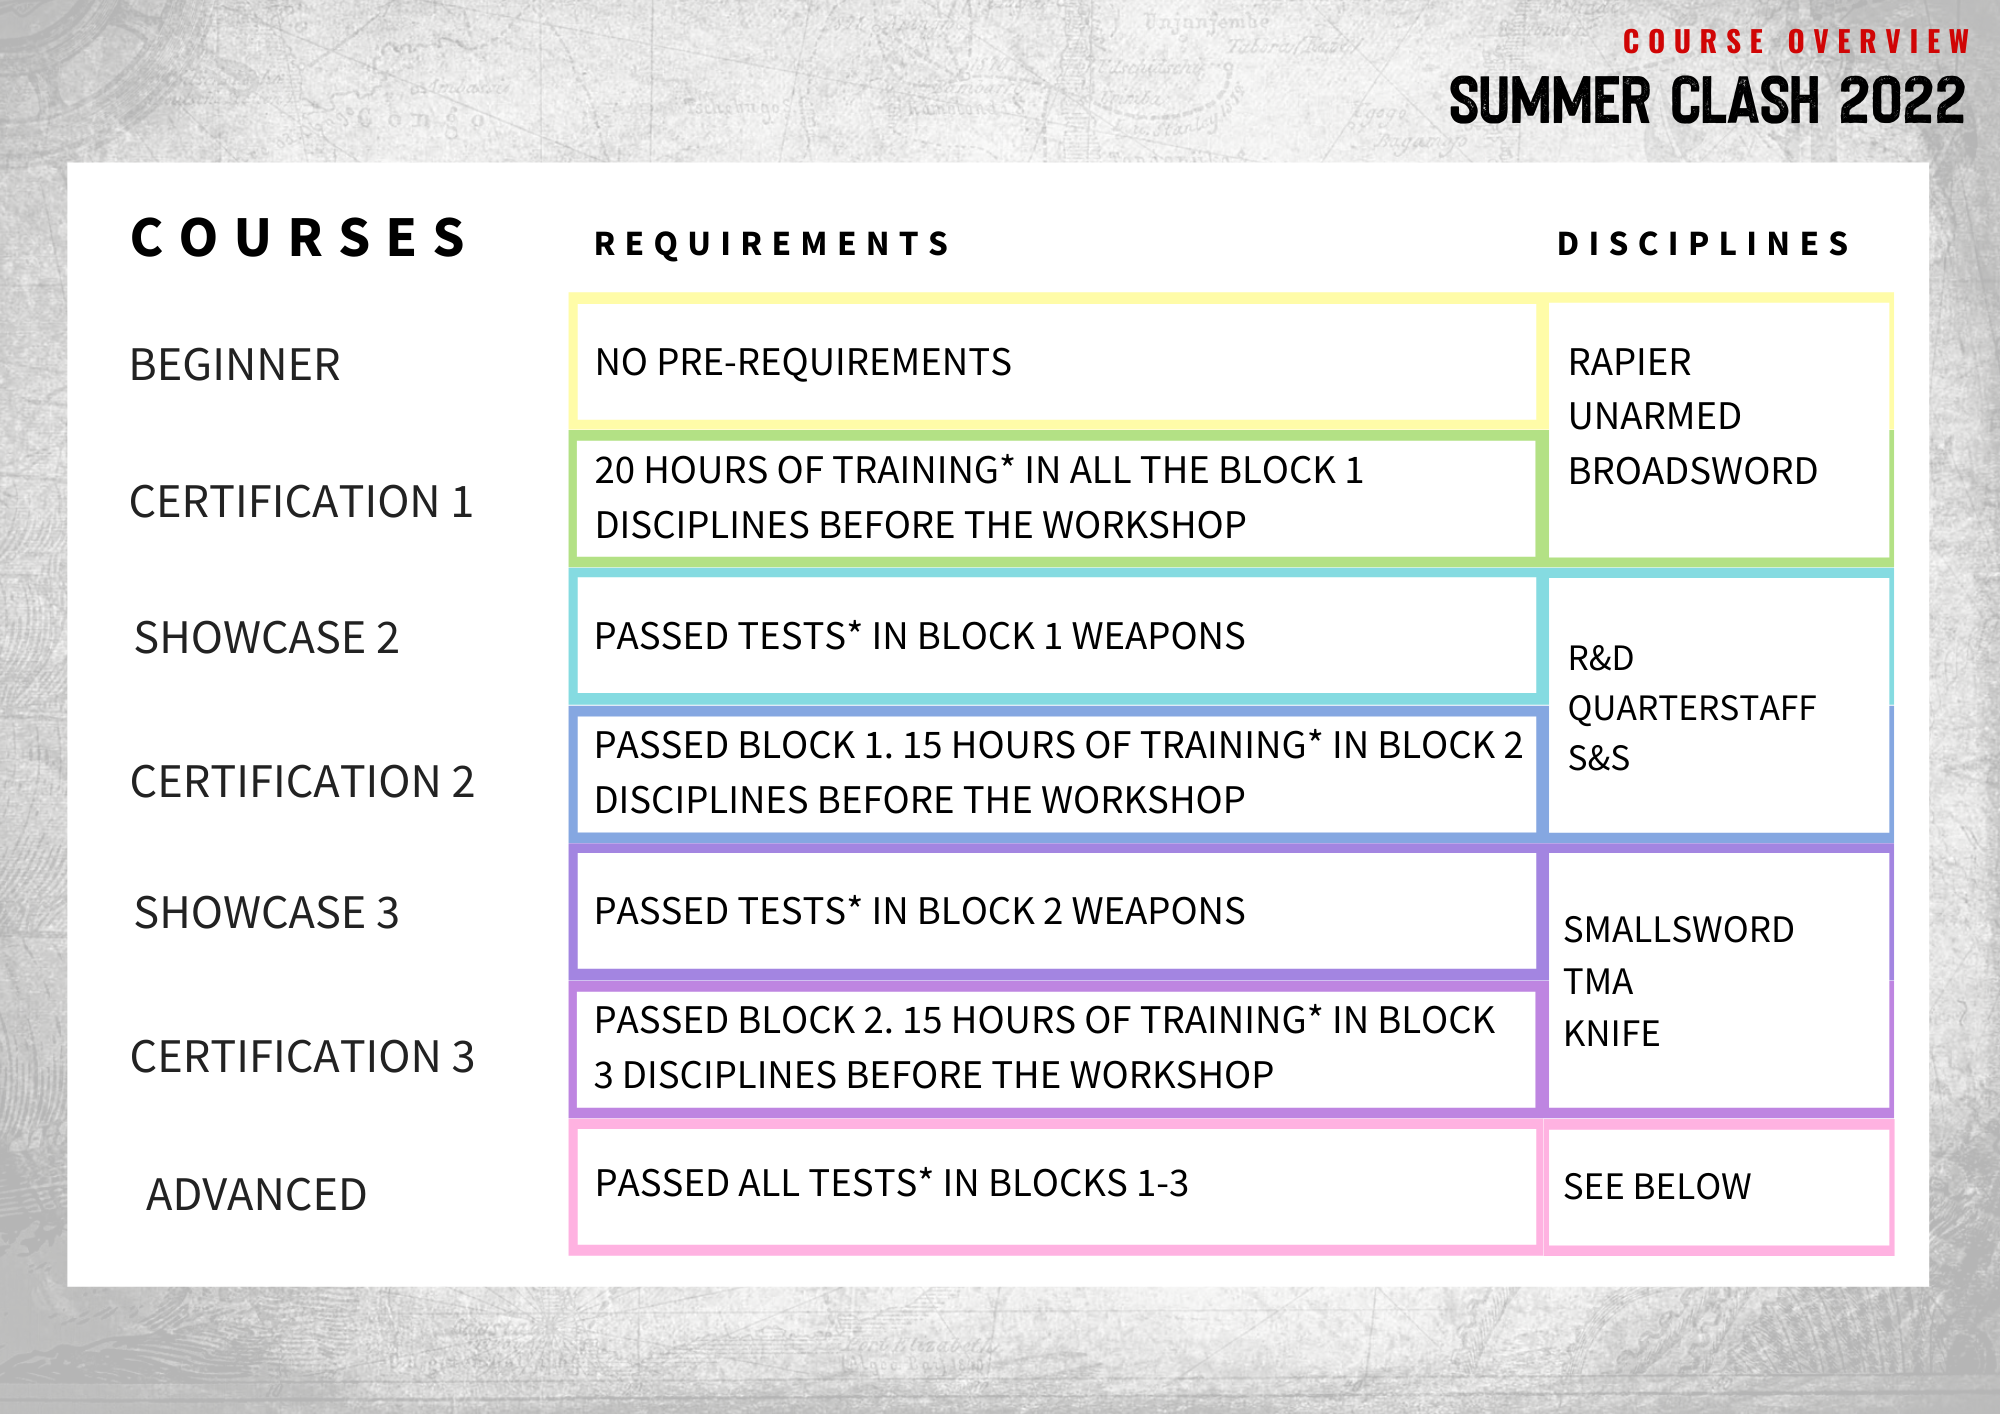 Different Levels for Summer Clash 2022. Block 1 includes unarmed, broadsword and rapier. Block 2 includes sword and shield, quarterstaff and rapier and dagger. Block 3 means smallsword, theatrical martial arts and knife. Advanced is described below.